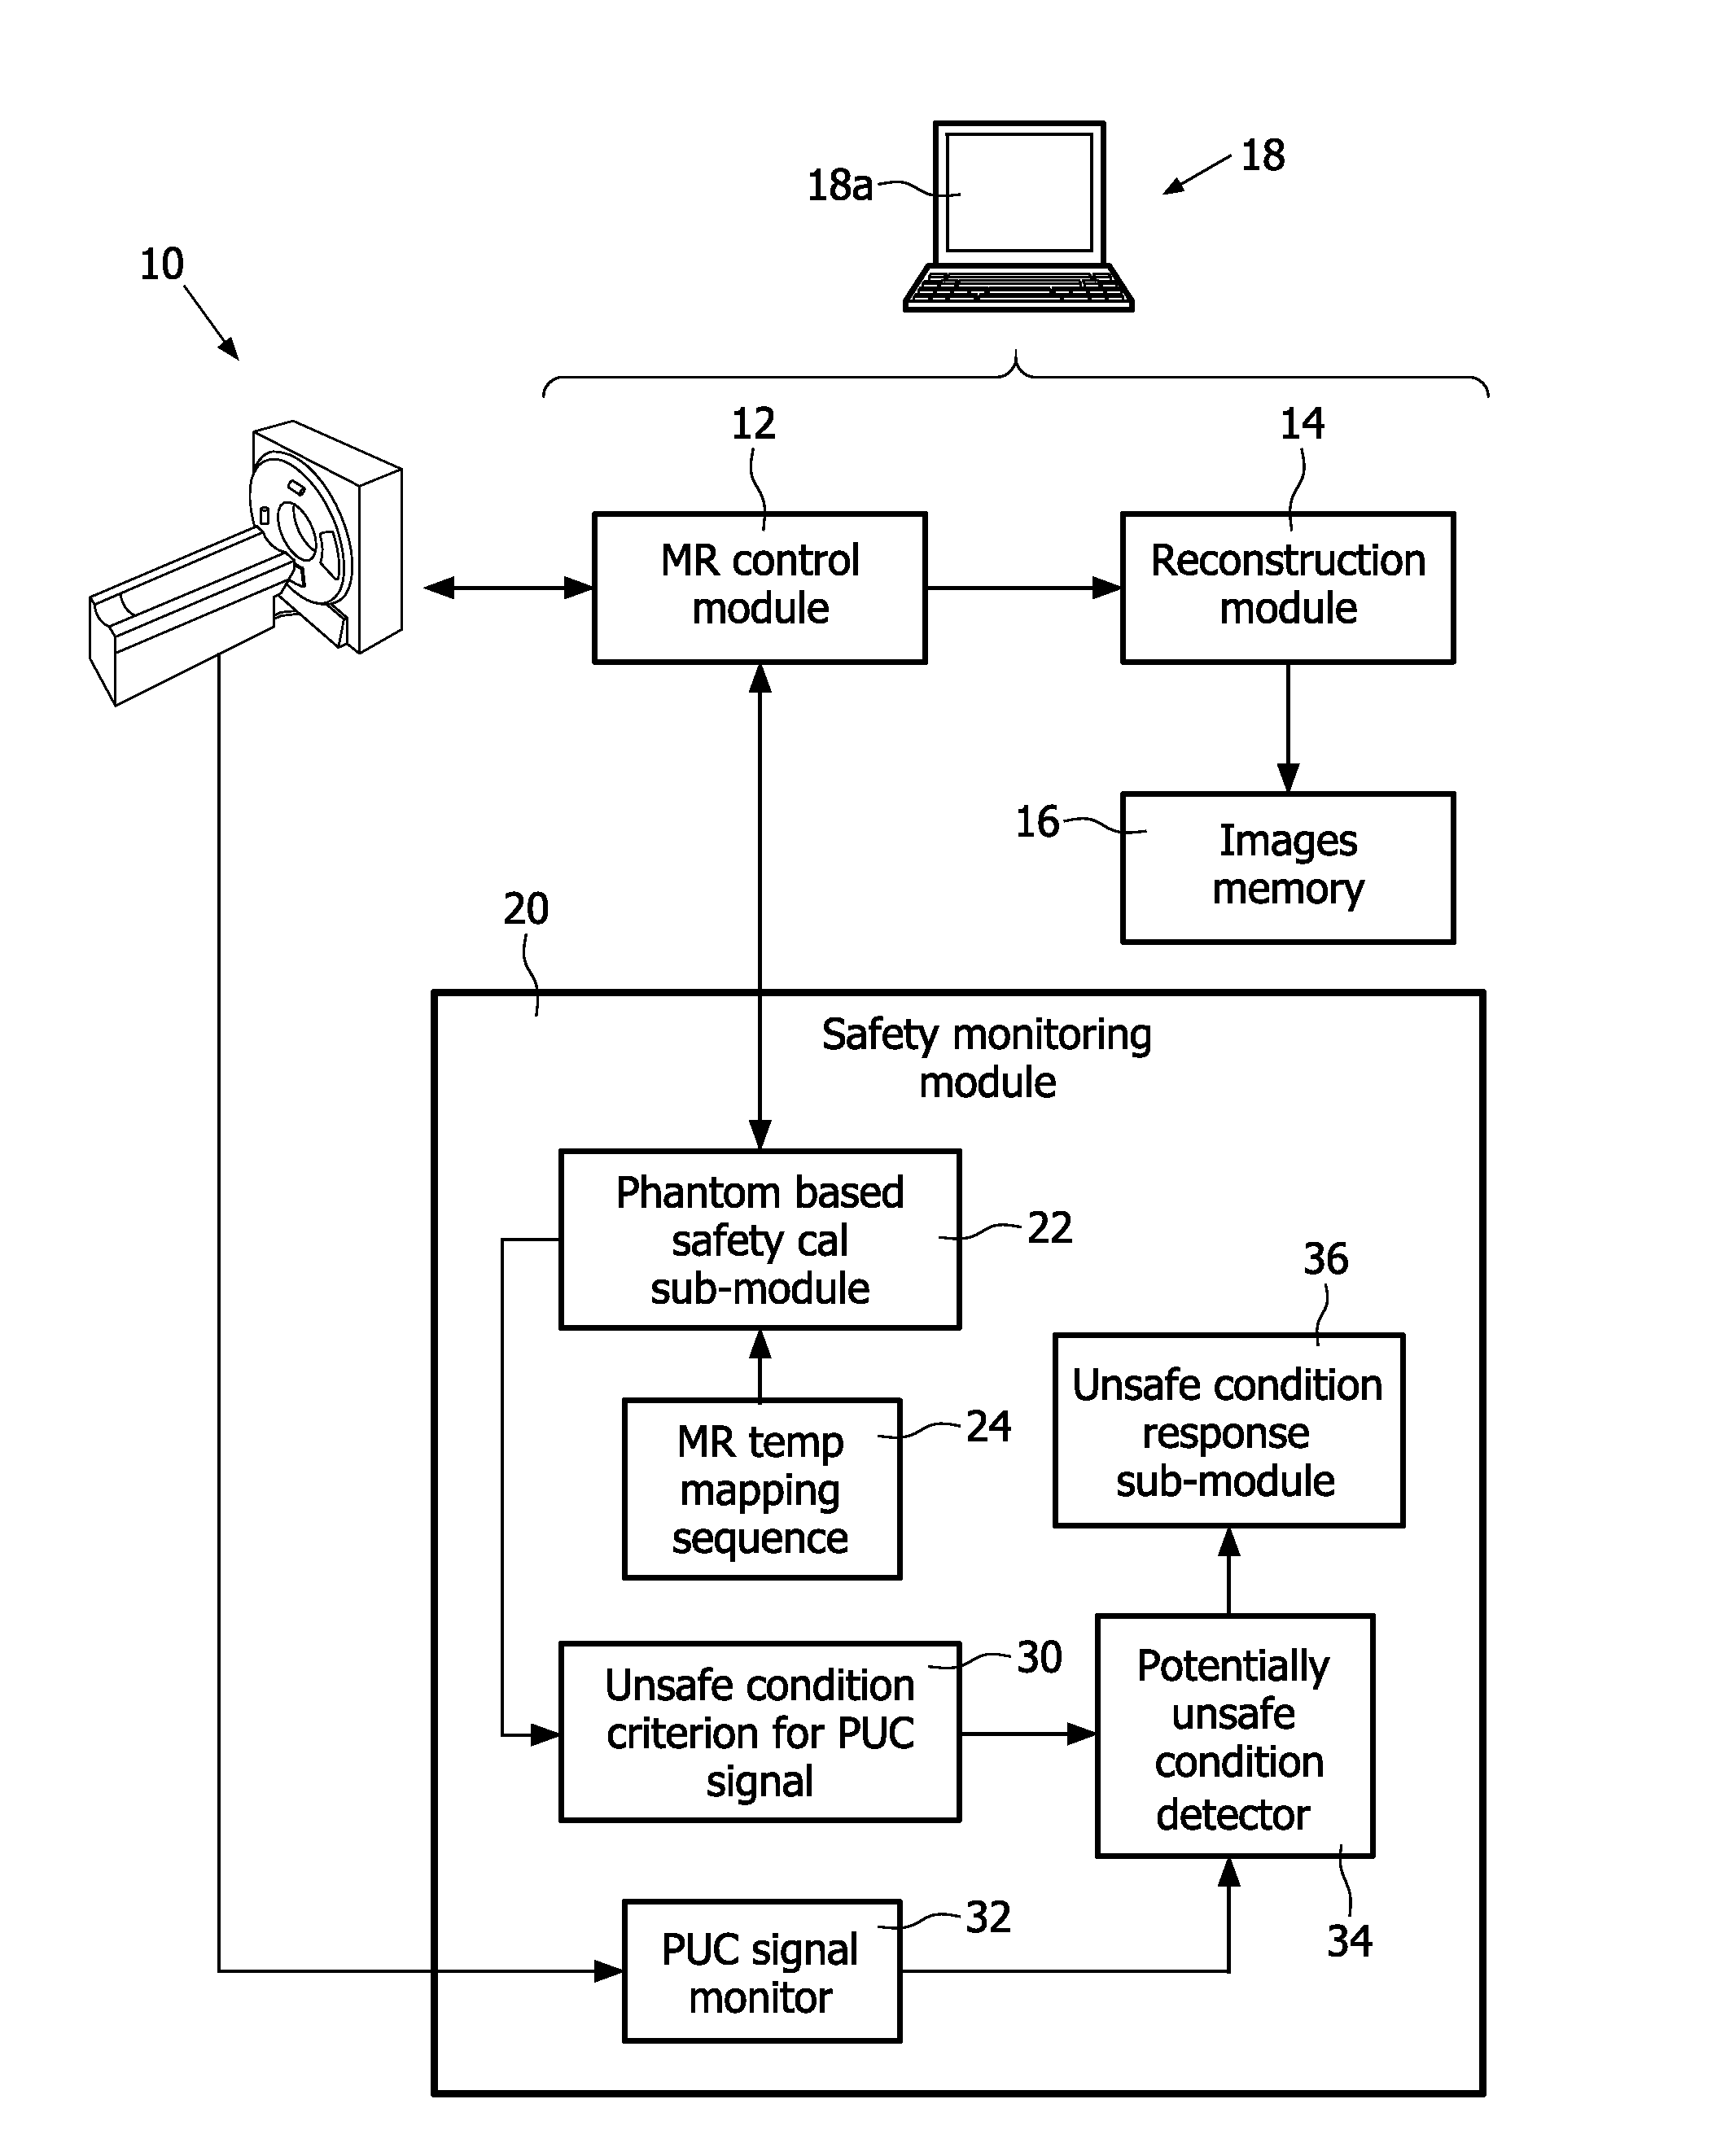 Magnetic resonance system and method for comprehensive implantable device safety tests and patient safety monitoring